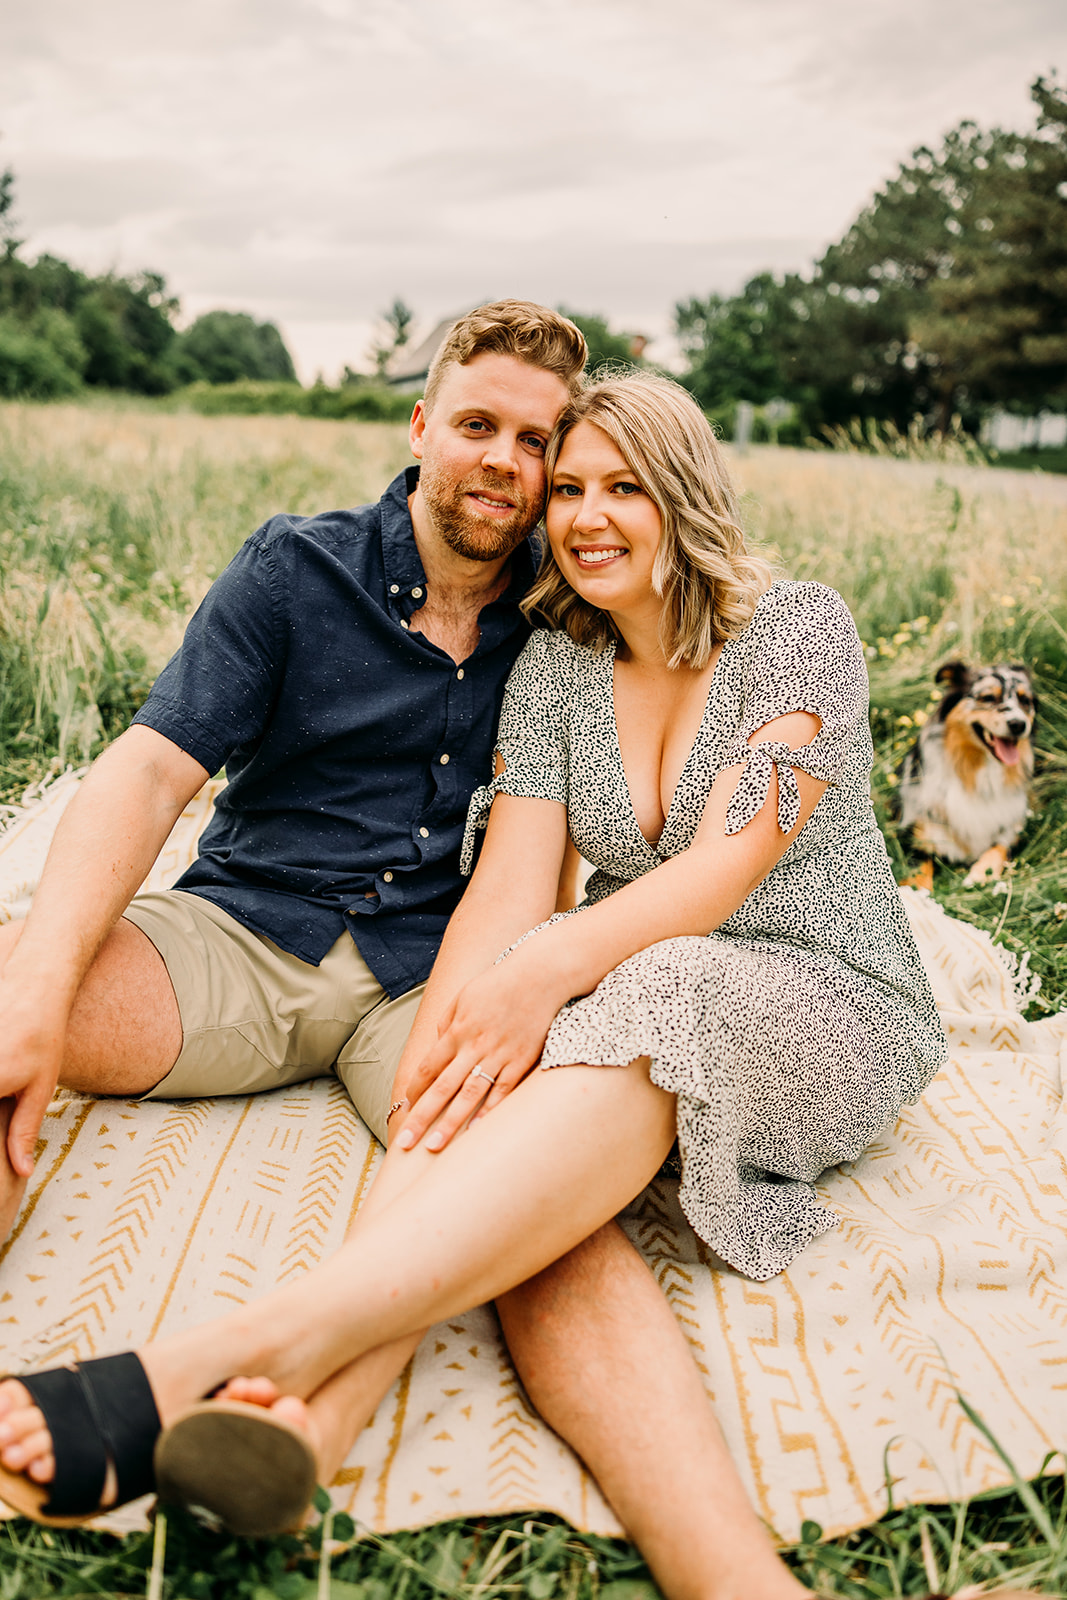 Field engagement session filled with laughter and love